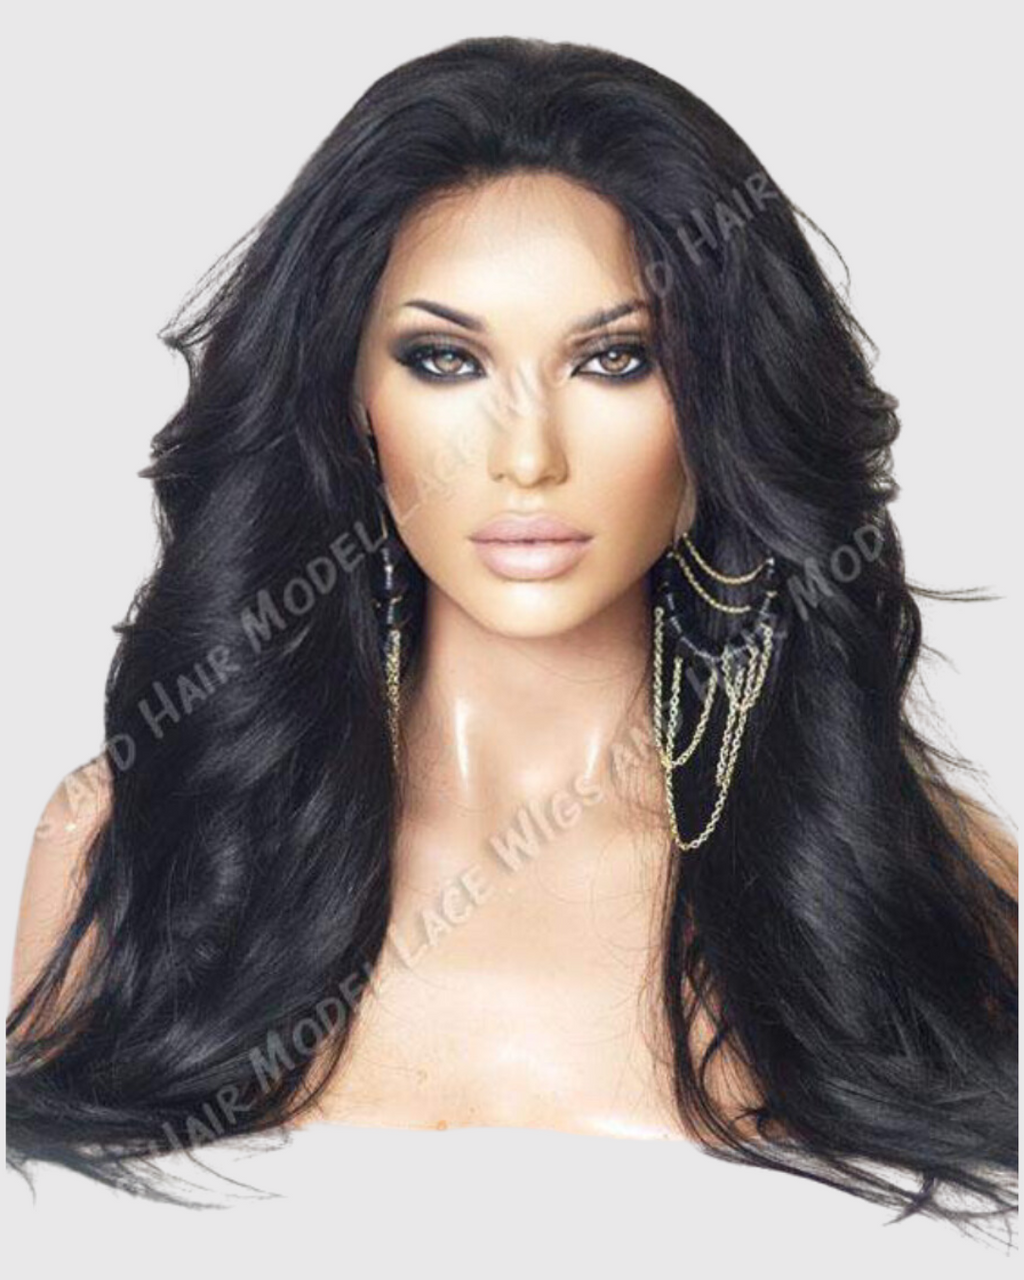 Made-to-Order | Full Lace Wig | (Sofia) Item#: FL1012B